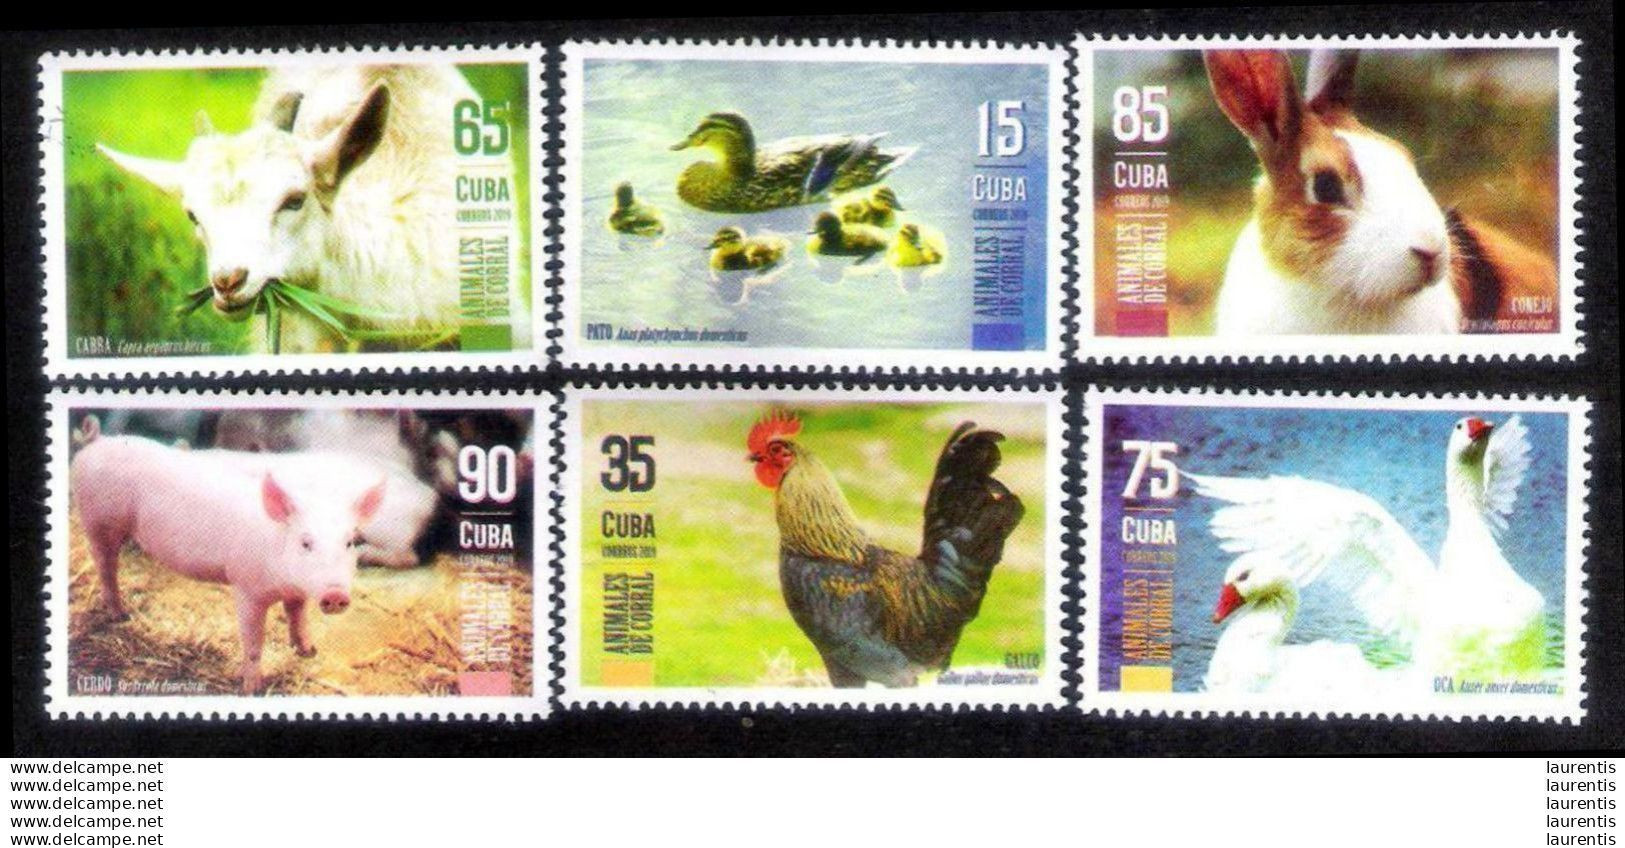 D2859  Ducks-Pigs-Roosters-Rabbits-Geese-Goats-Cows - 2019 - MNH - Cb - 2,85 - Boerderij